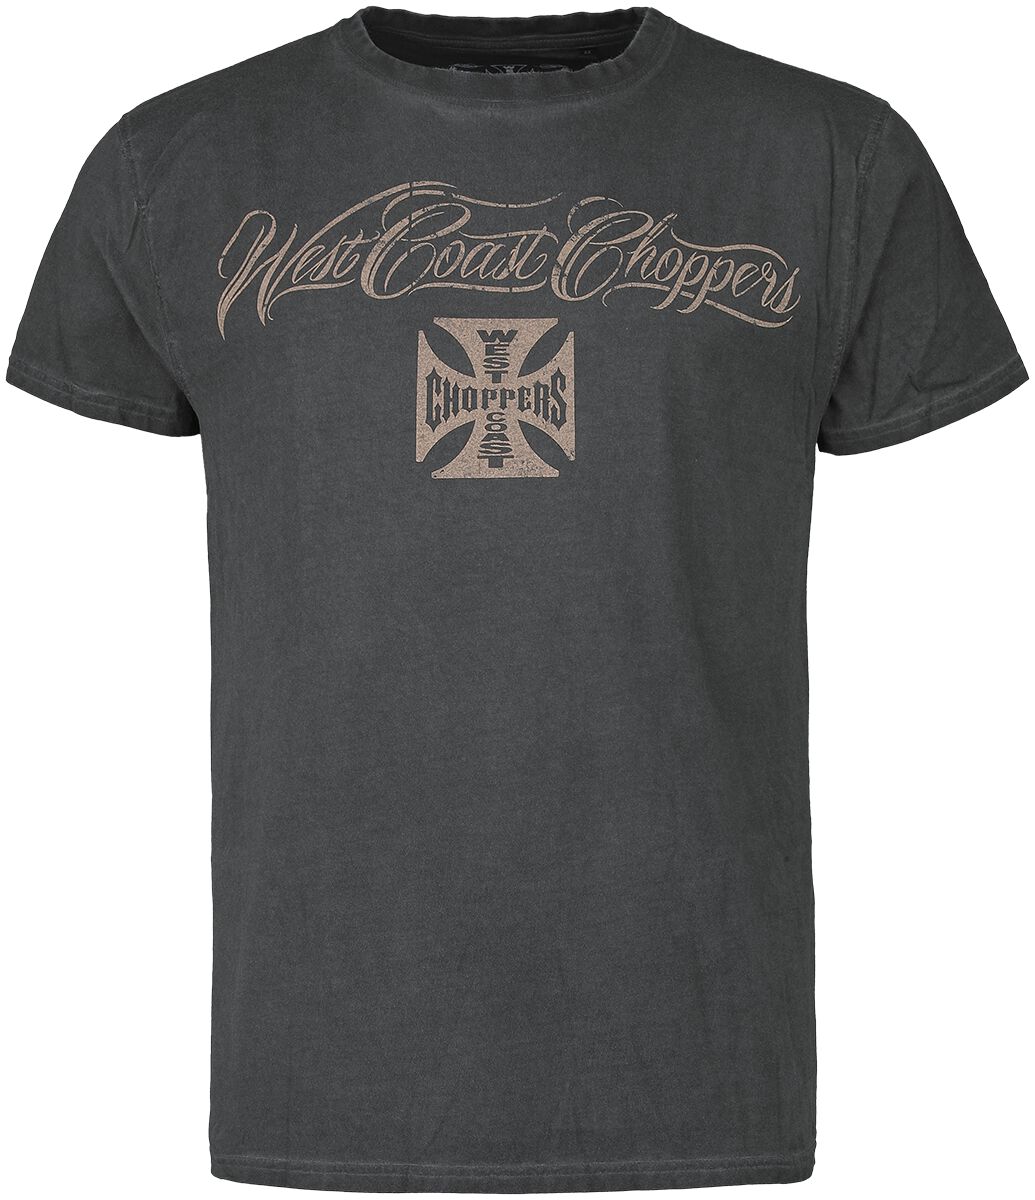 Image of T-Shirt di West Coast Choppers - Eagle crest - S a 4XL - Uomo - antracite